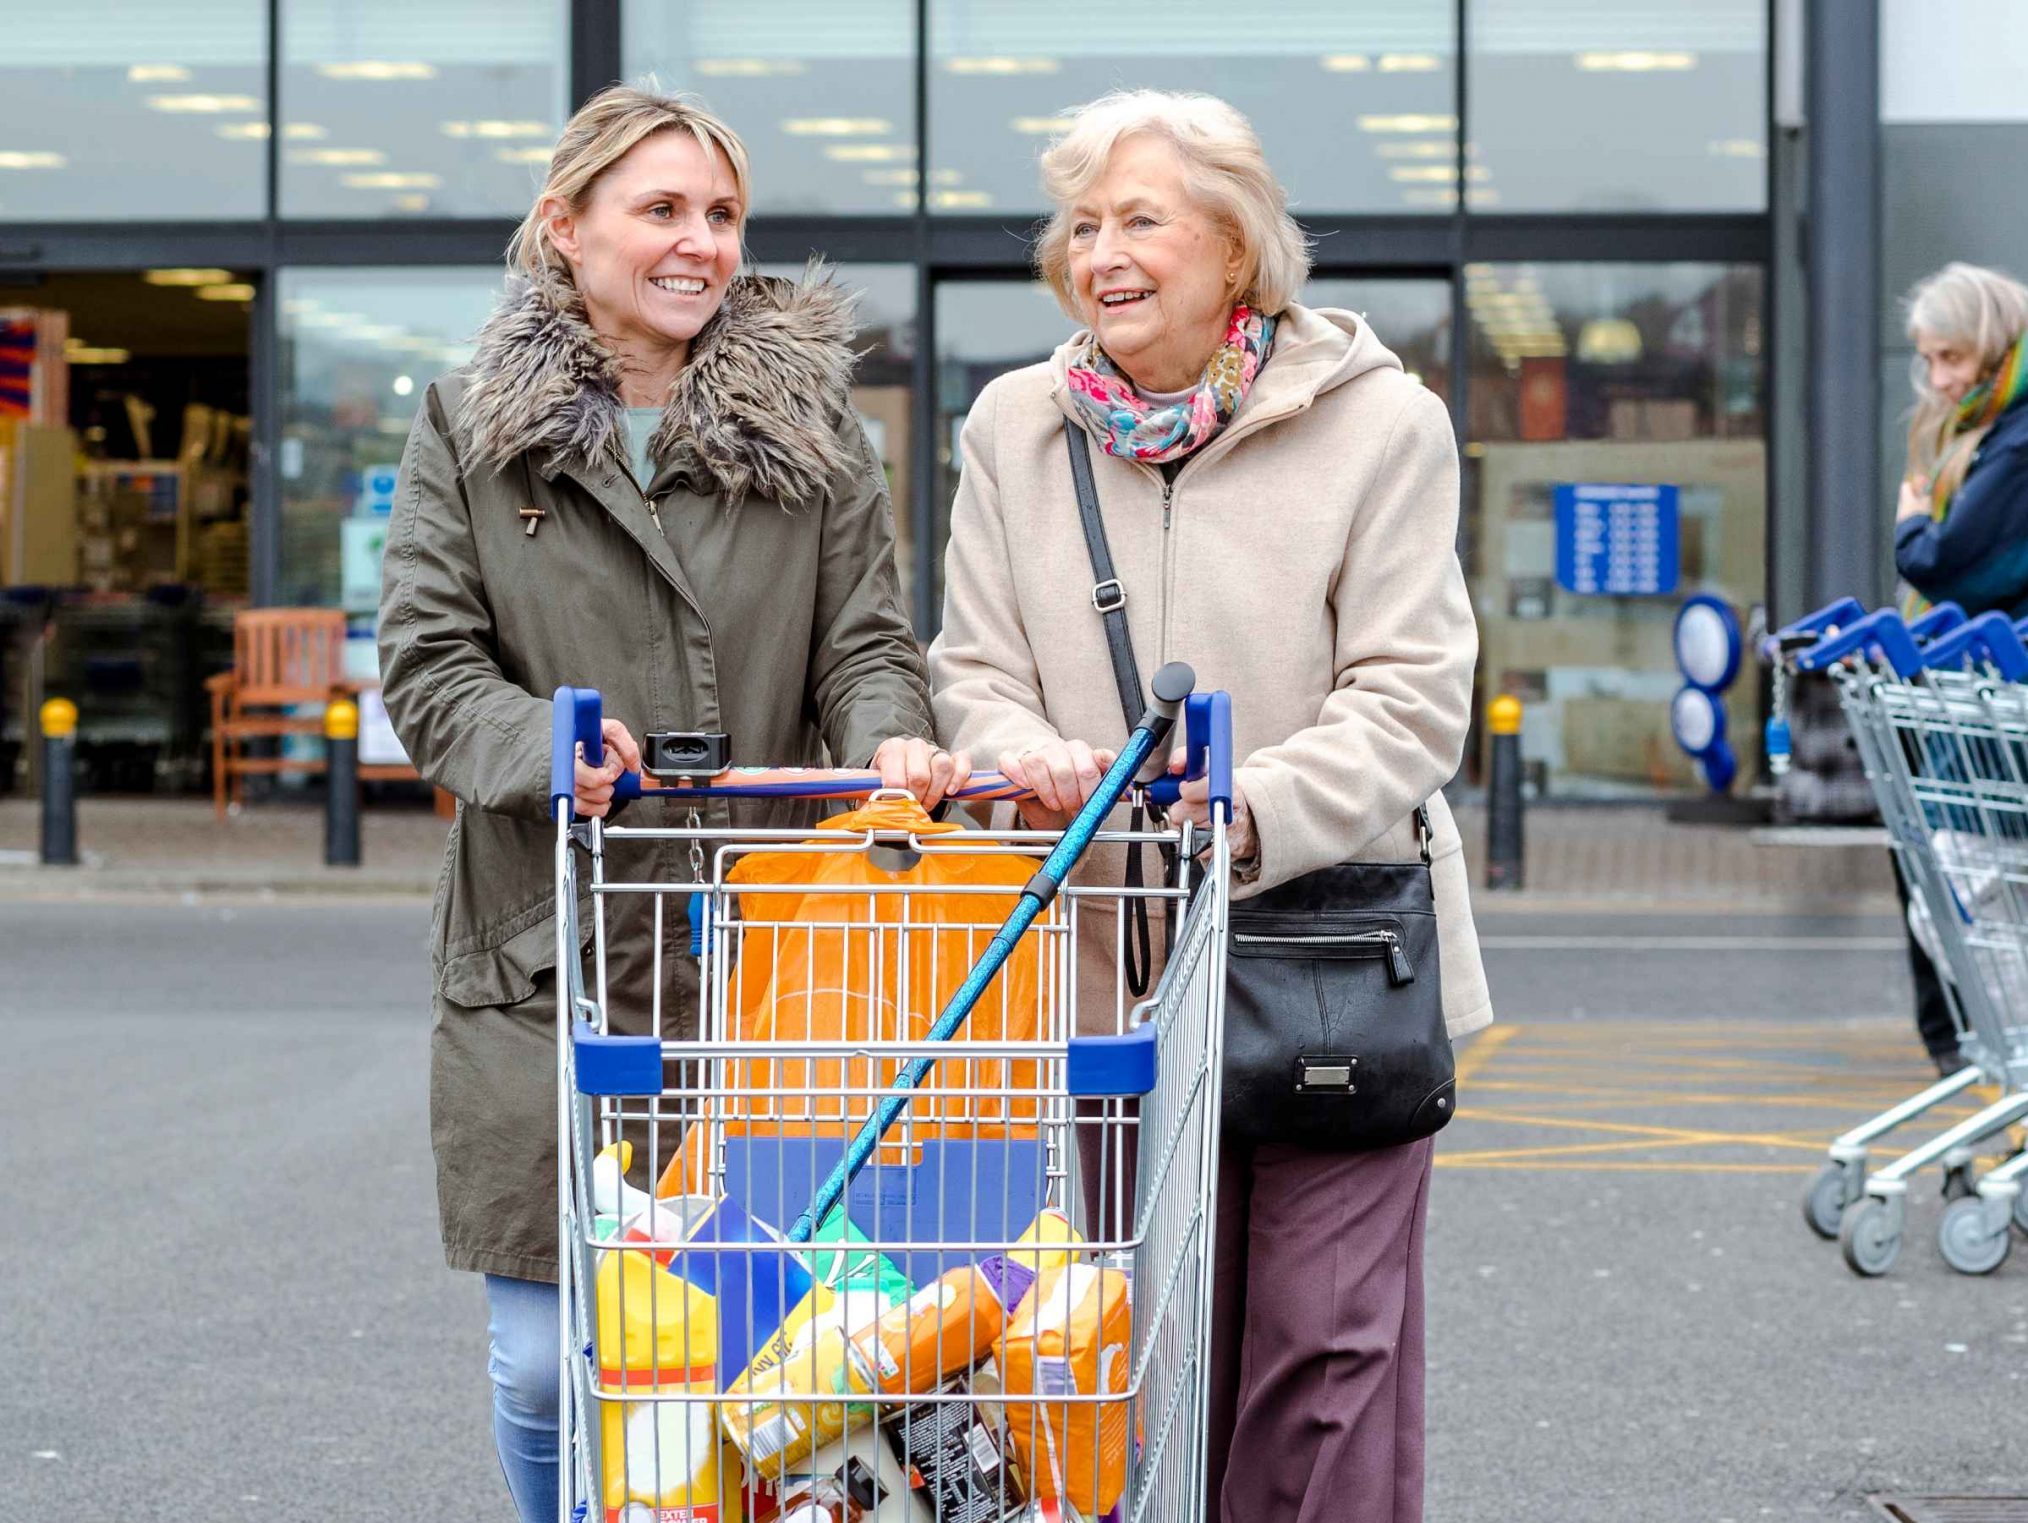 Aged person and support worker pushing shopping cart in carpark